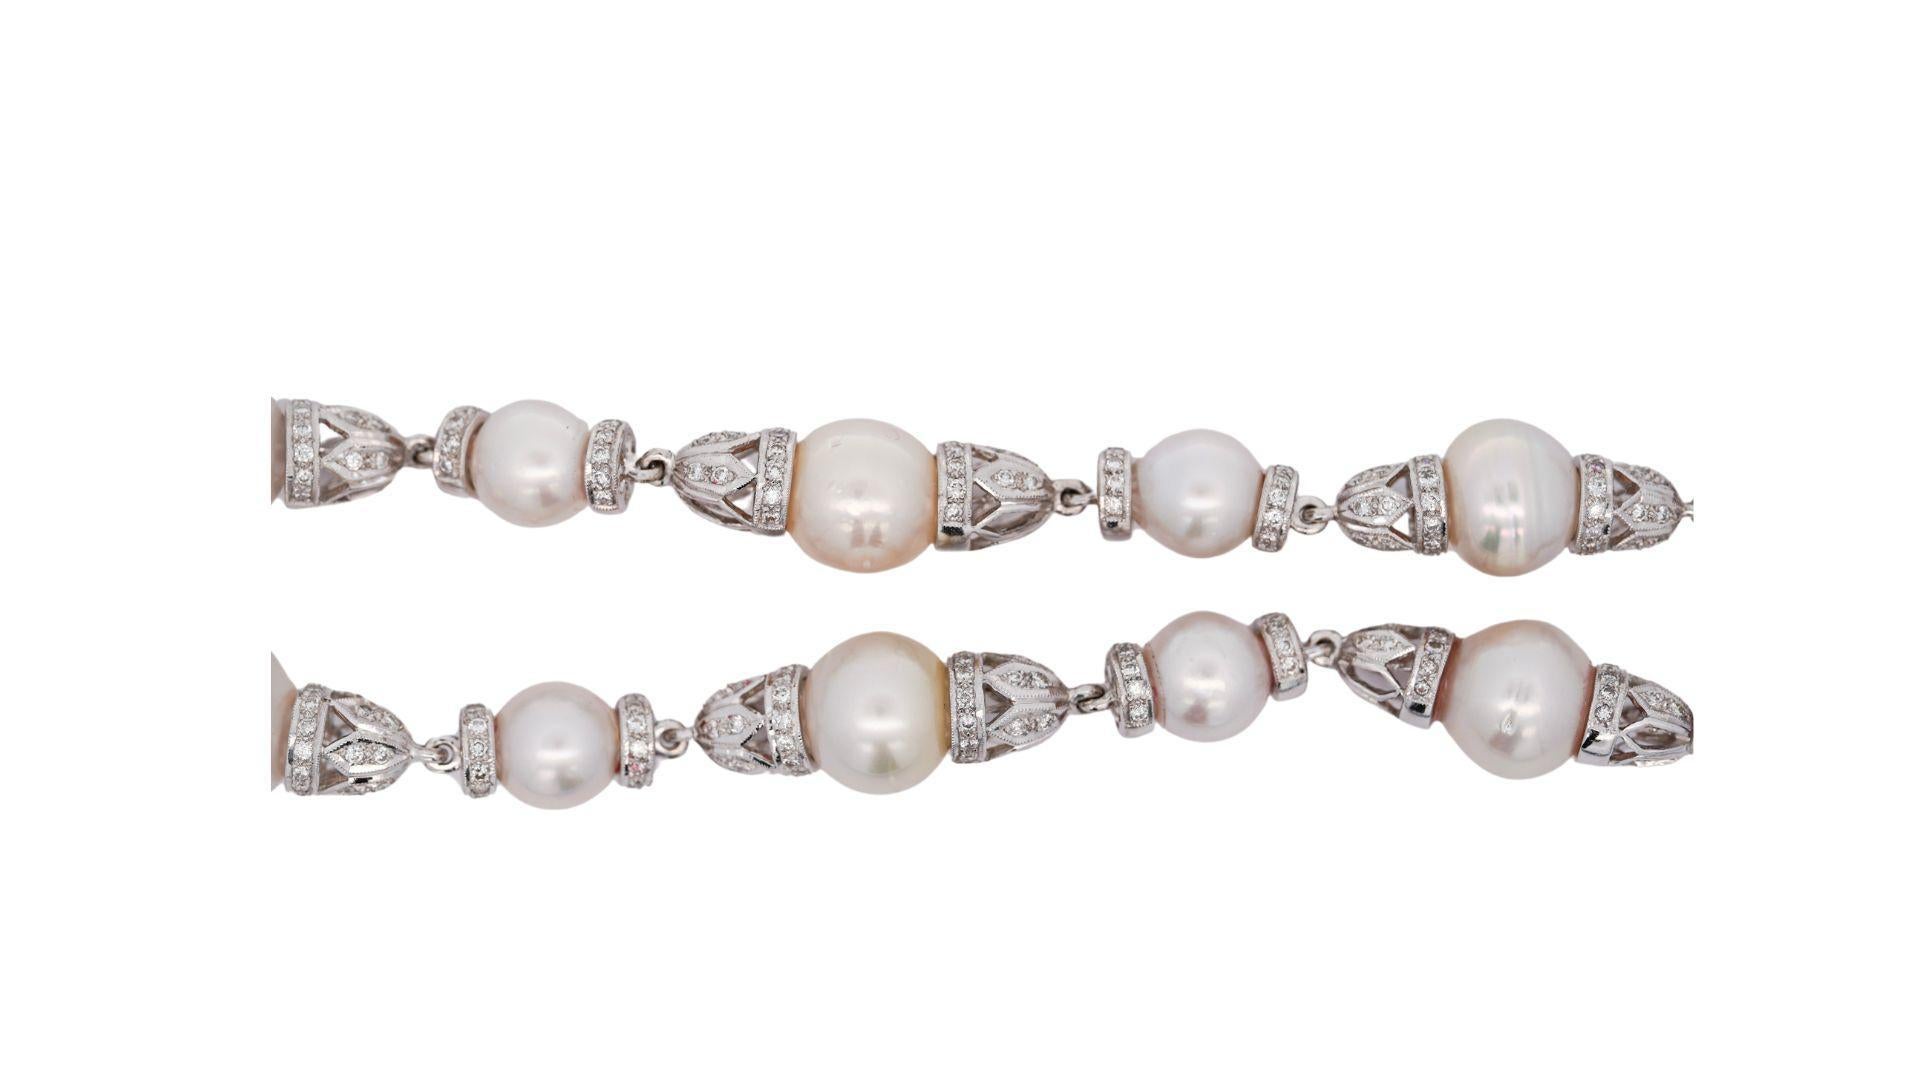 Contemporary Vintage 18K White Gold 13mm South Sea Pearl & Diamond Choker Necklace For Sale